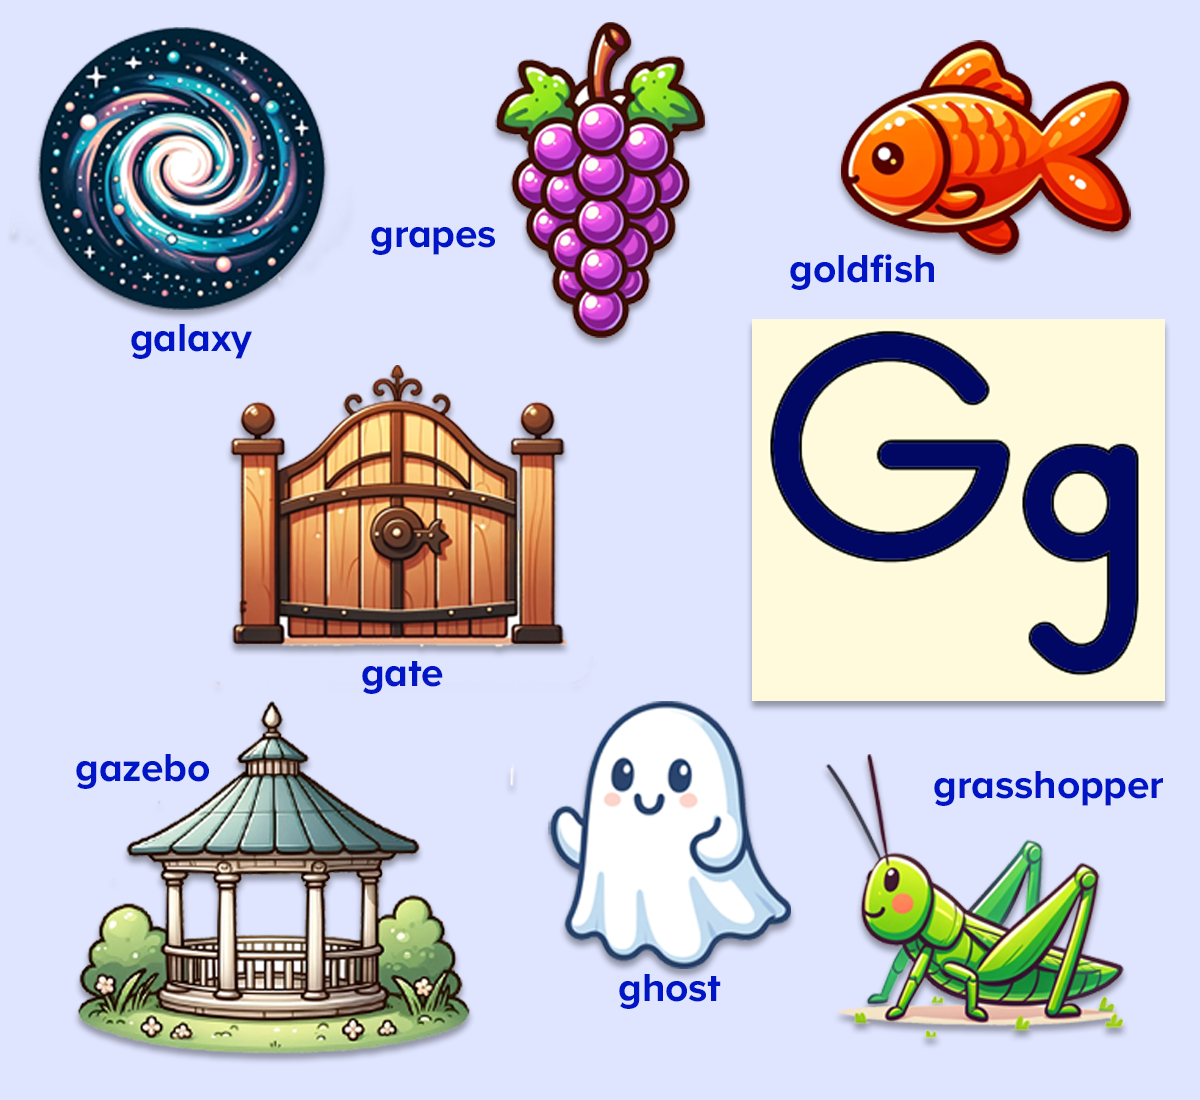 Free printable letter G words for kids from ABCmouse.com. Galaxy, grapes, goldfish, gate, gazebo, ghost, grasshopper.